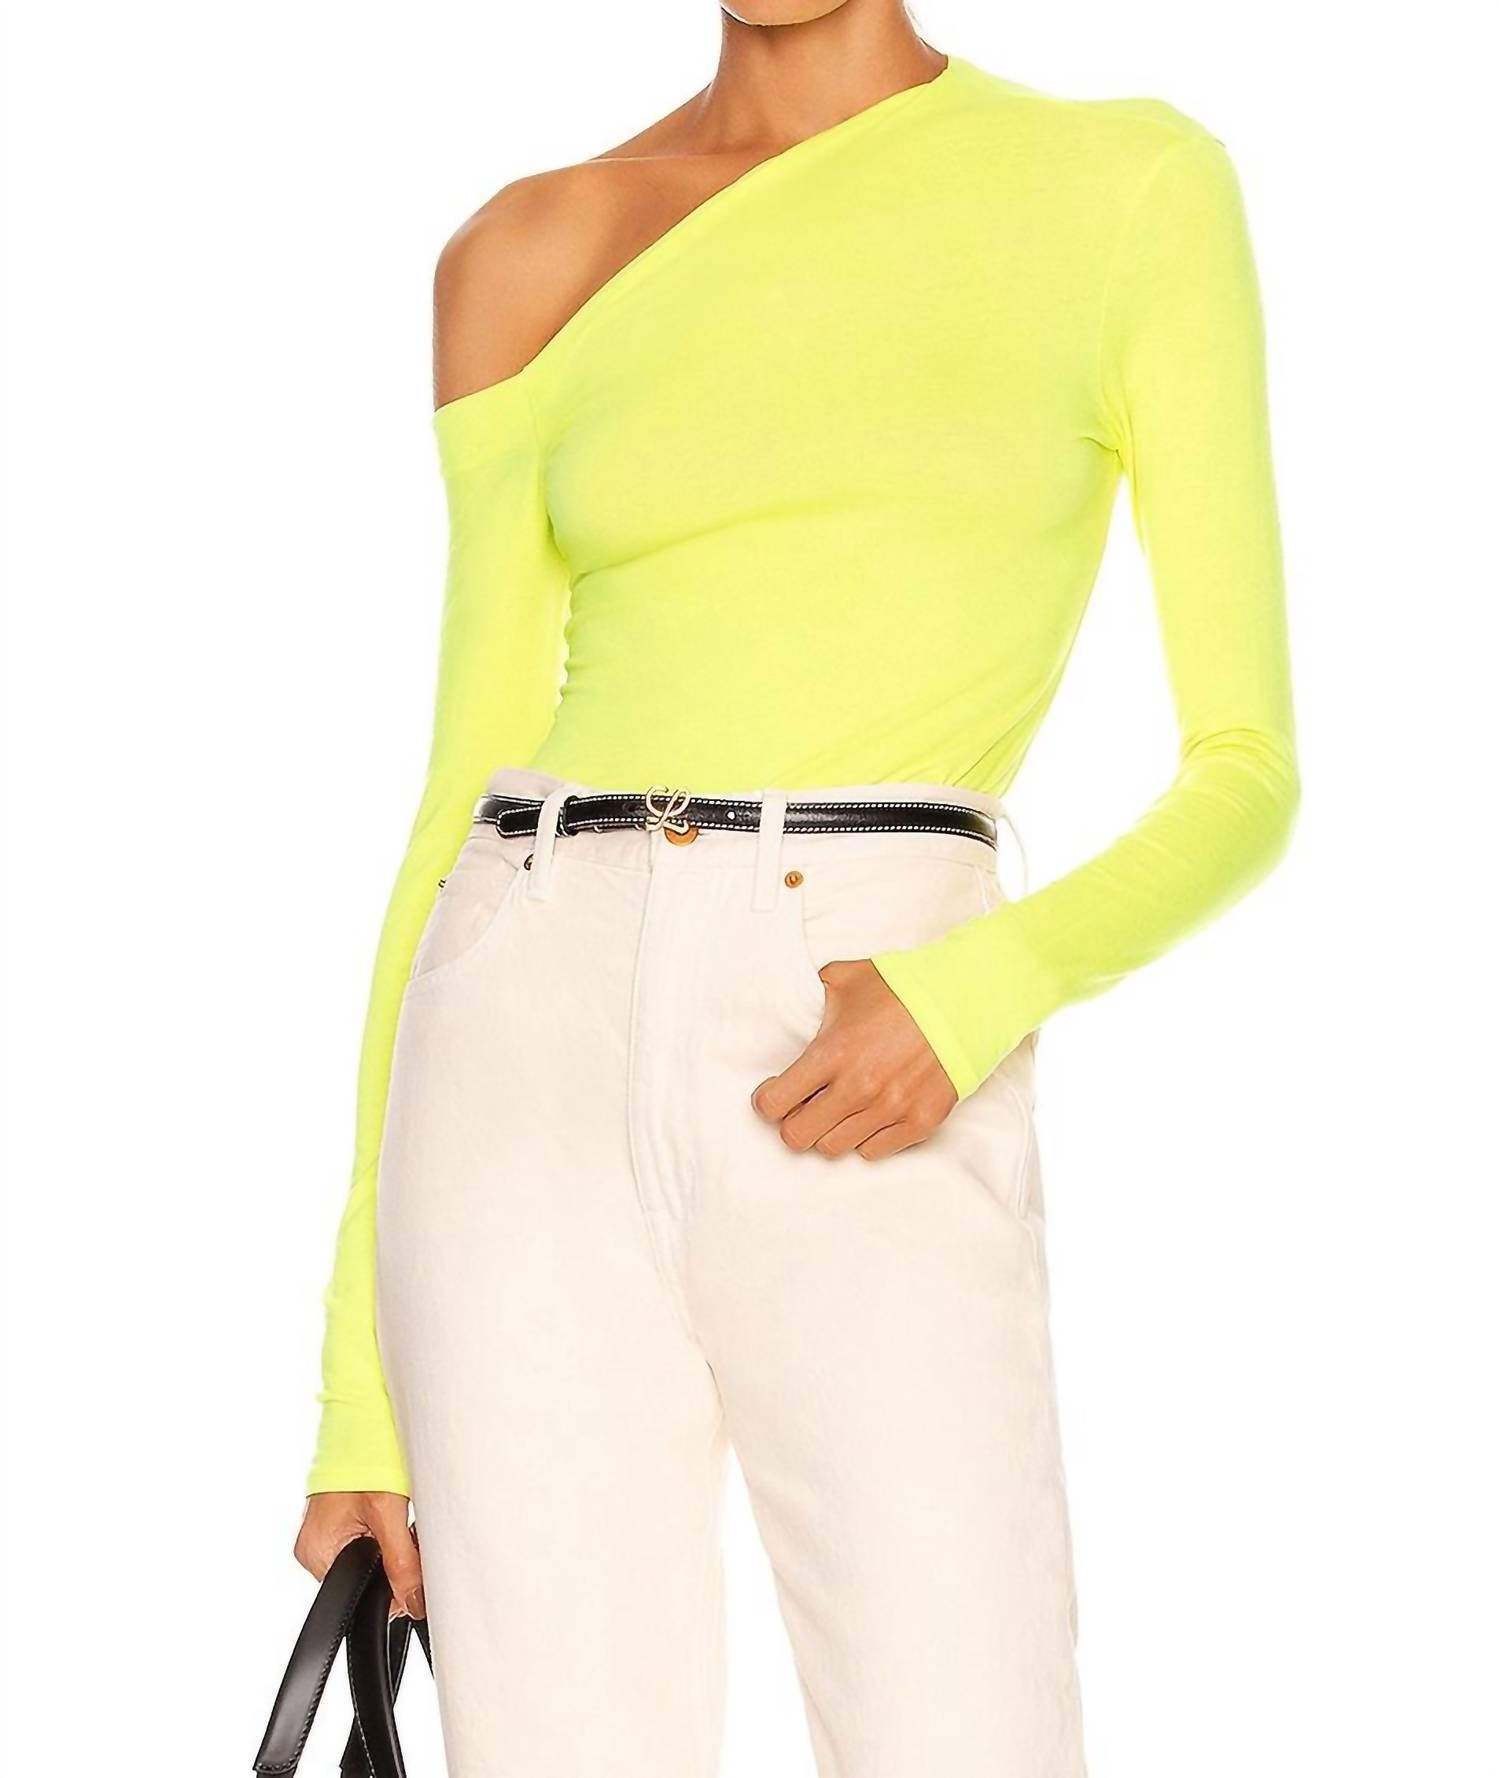 ENZA COSTA Angled Exposed Shoulder Top in Citron